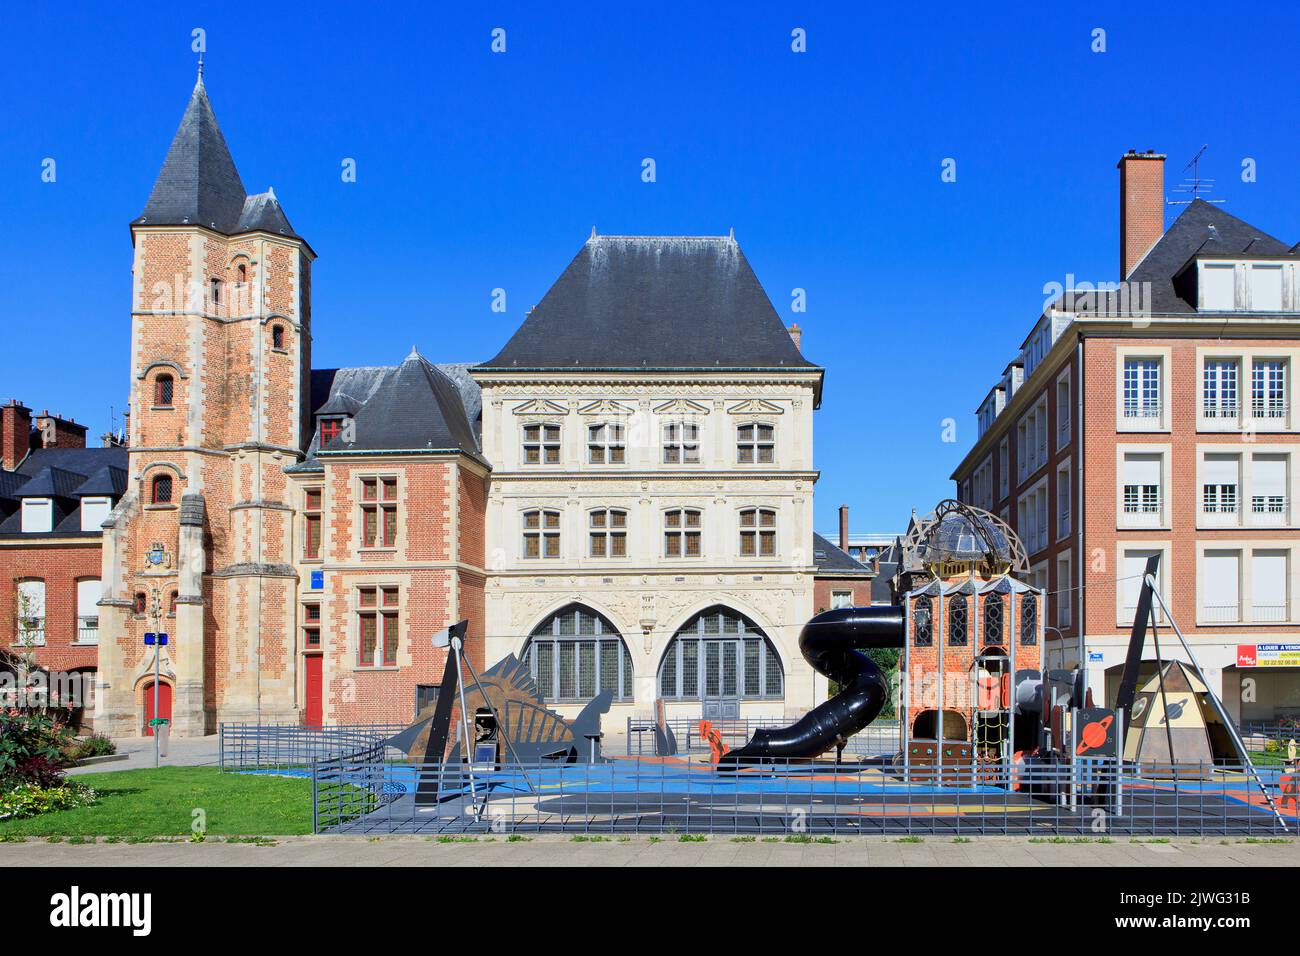 A Jules Verne-inspired playground flanked by the Logis du Roy building with octagonal tower and the Sagittarius House in Amiens (Somme), France Stock Photo